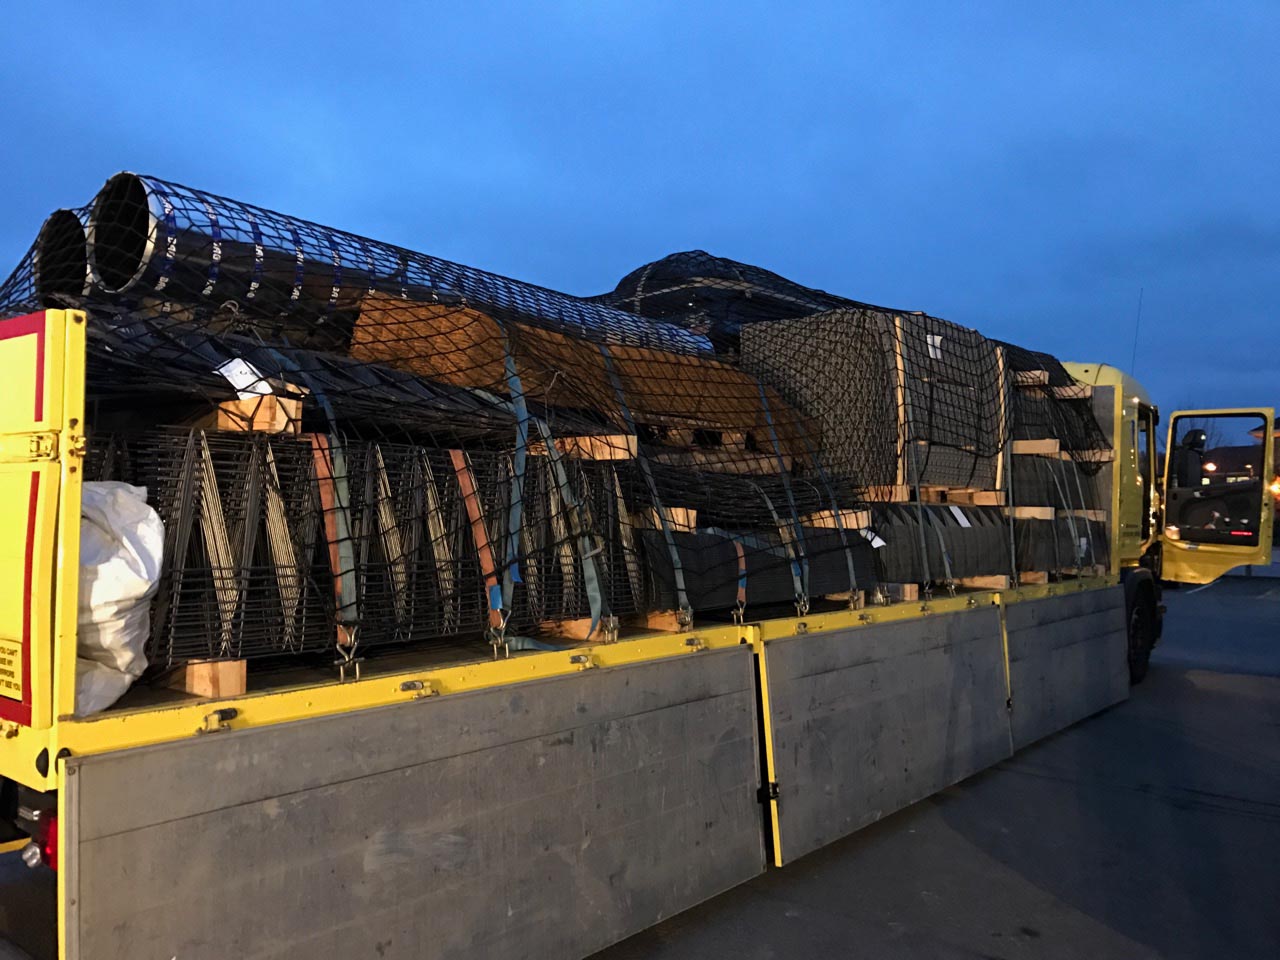 Customer photo showing extra heavy duty cargo nets as part of a load control solution on the back of a truck.